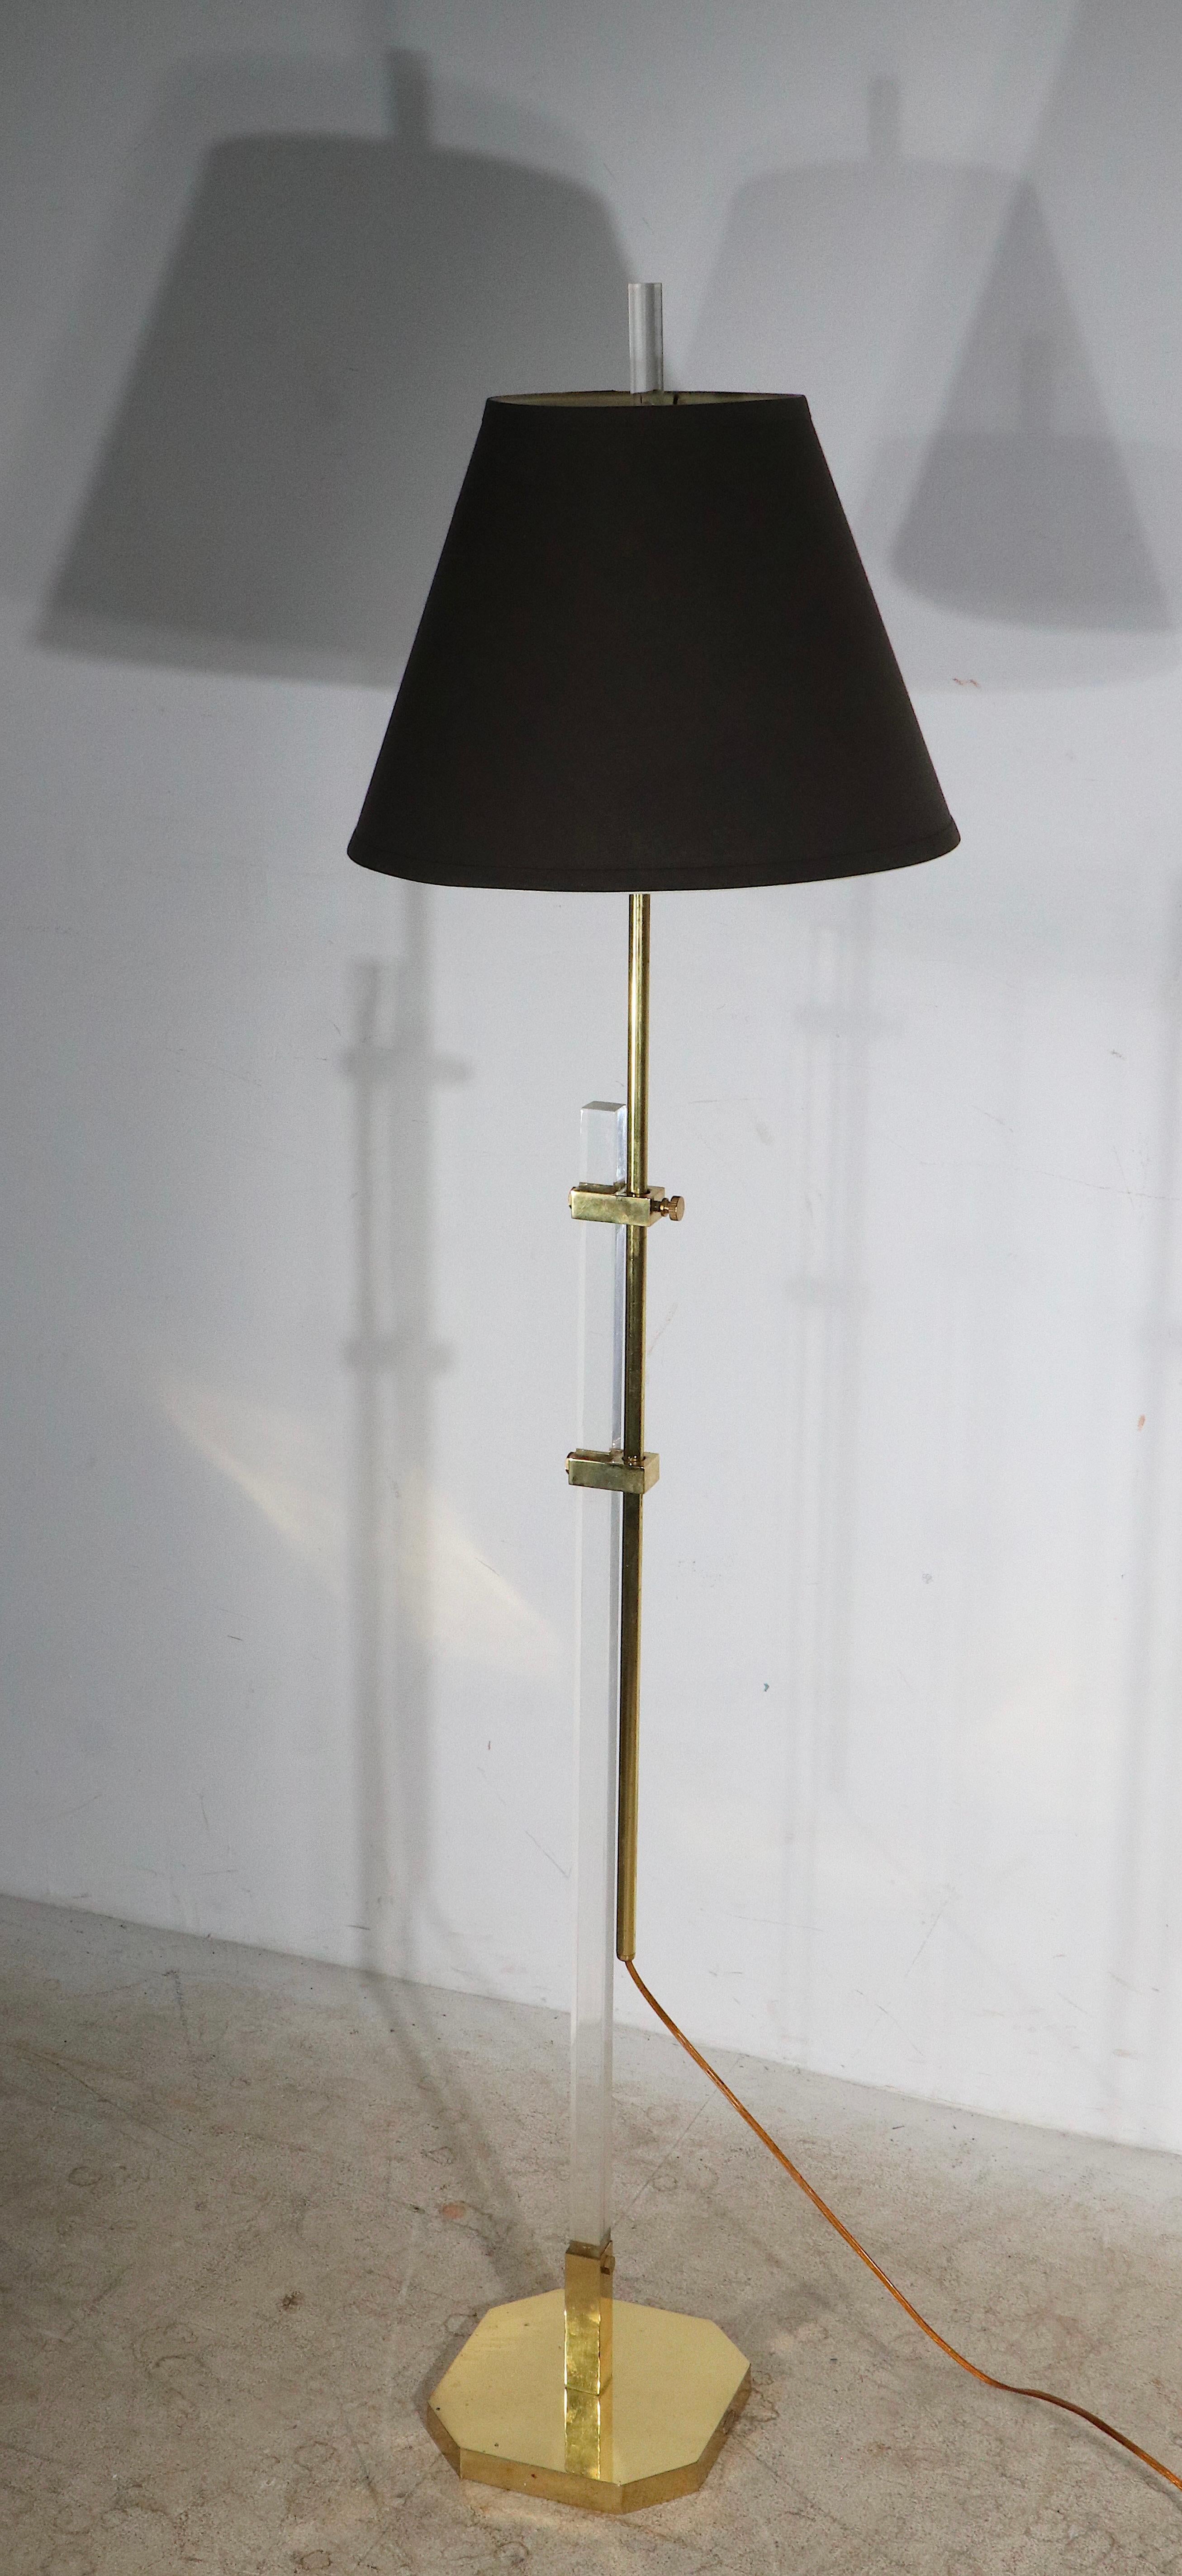  Adjustable Hollywood Regency Style Brass and Lucite Floor Lamp c. 1970/1980's For Sale 2